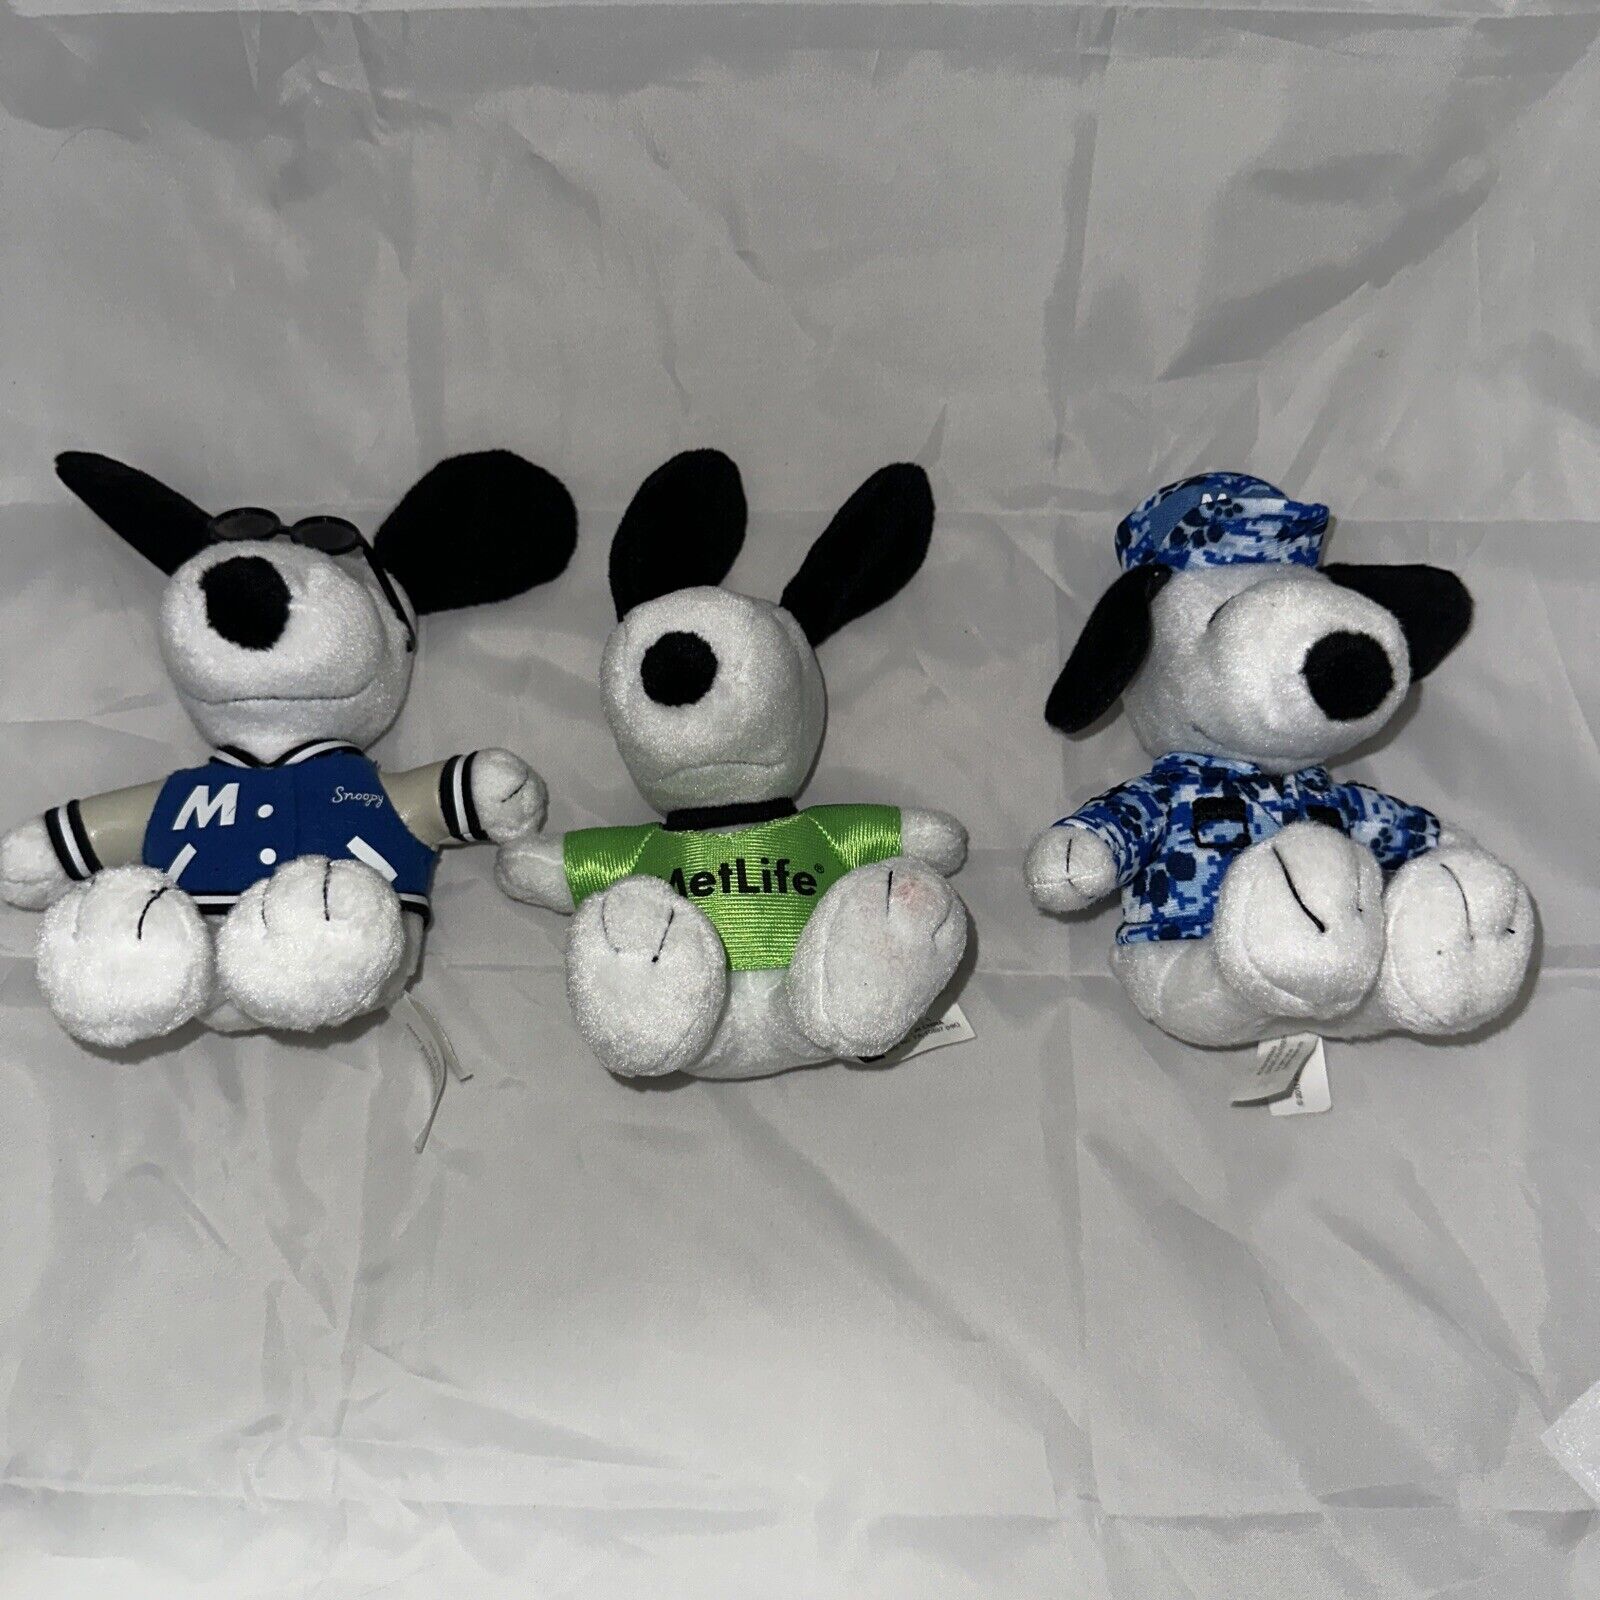 Lot of 3 MetLife Promotional Collectable Snoopy Dolls